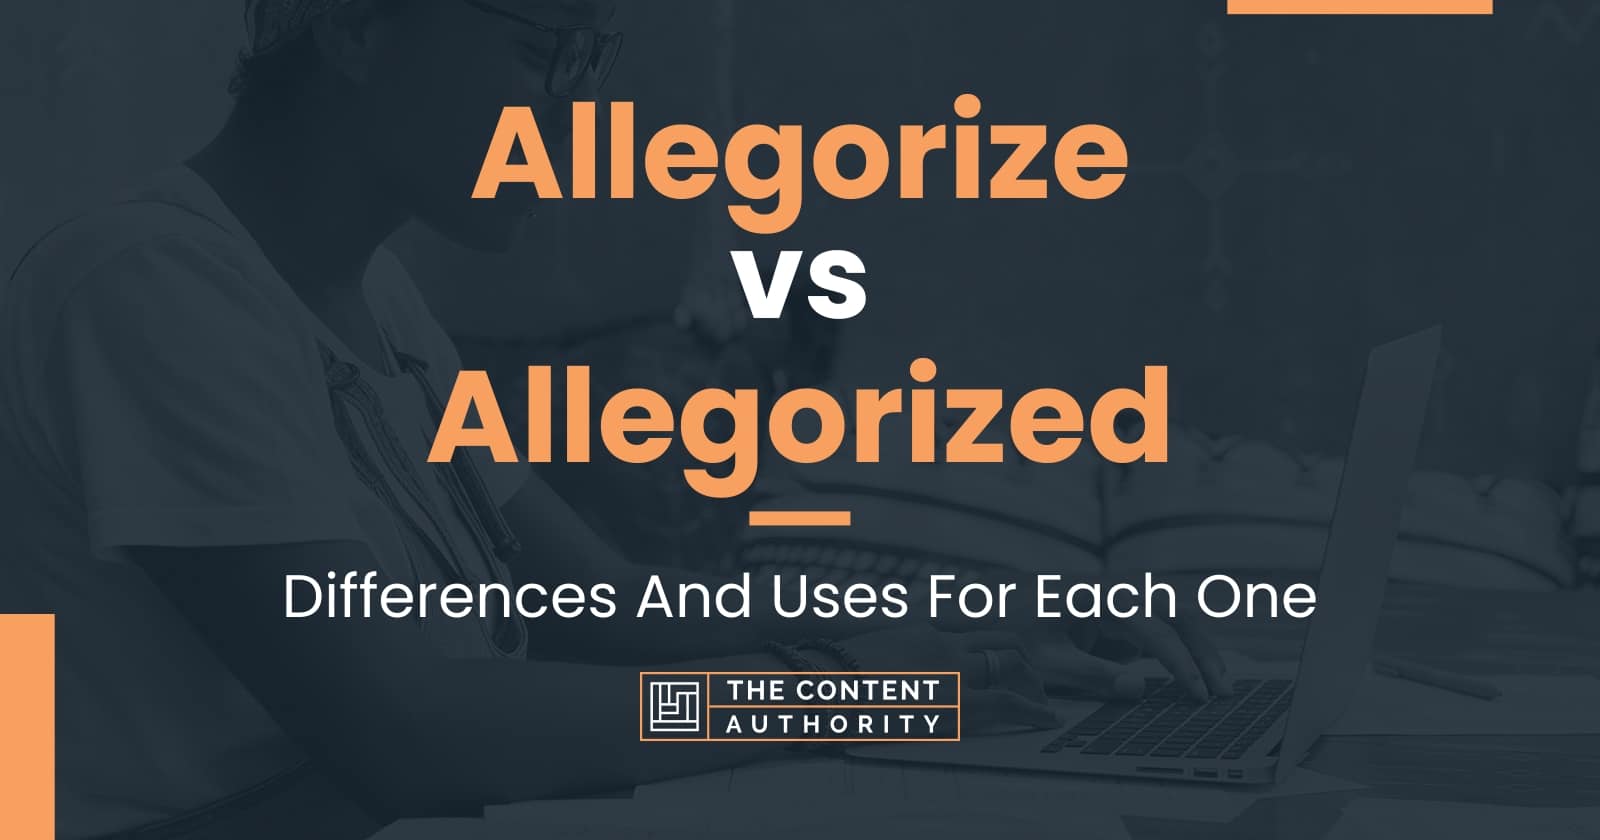 Allegorize vs Allegorized: Differences And Uses For Each One